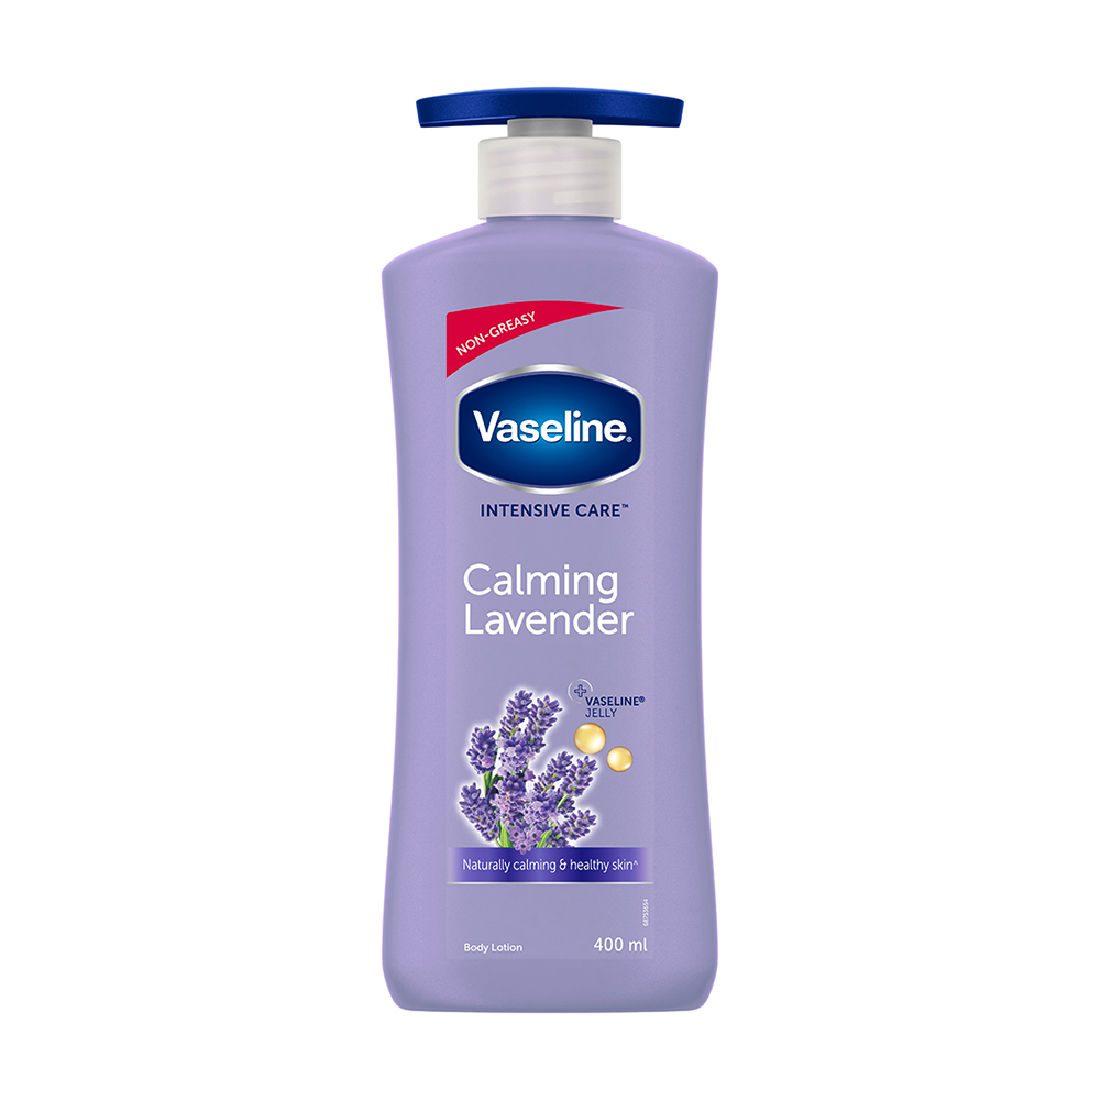 Vaseline Intensive Care Calming Lavender Body Lotion, 400 ml, Pack of 1 